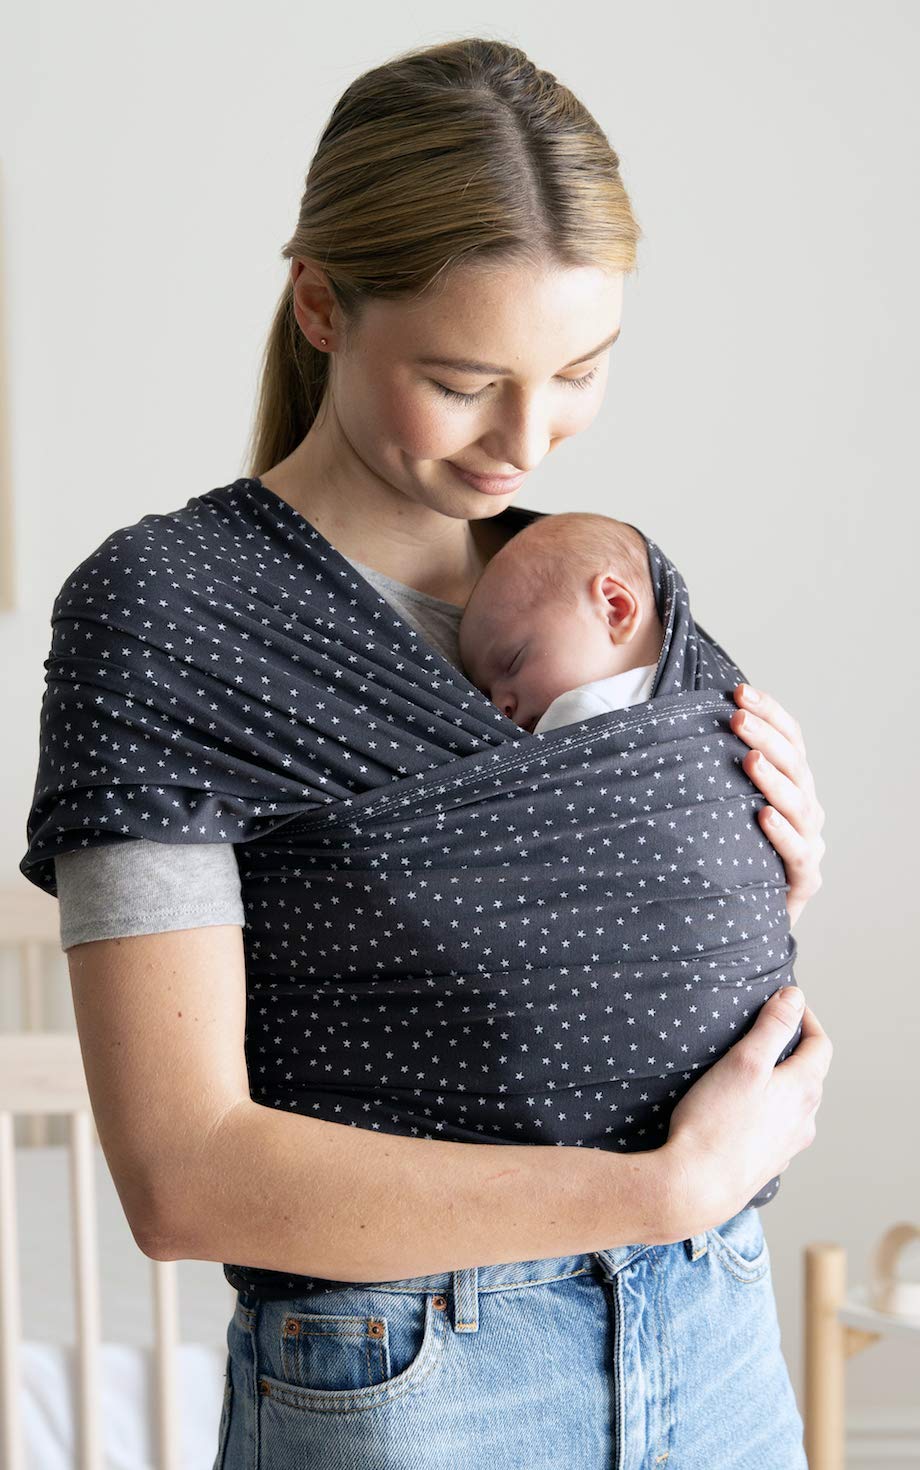 Ergobaby Aura Baby Carrier Wrap for Newborn to Toddler (7-25 Pounds), Twinkle Grey